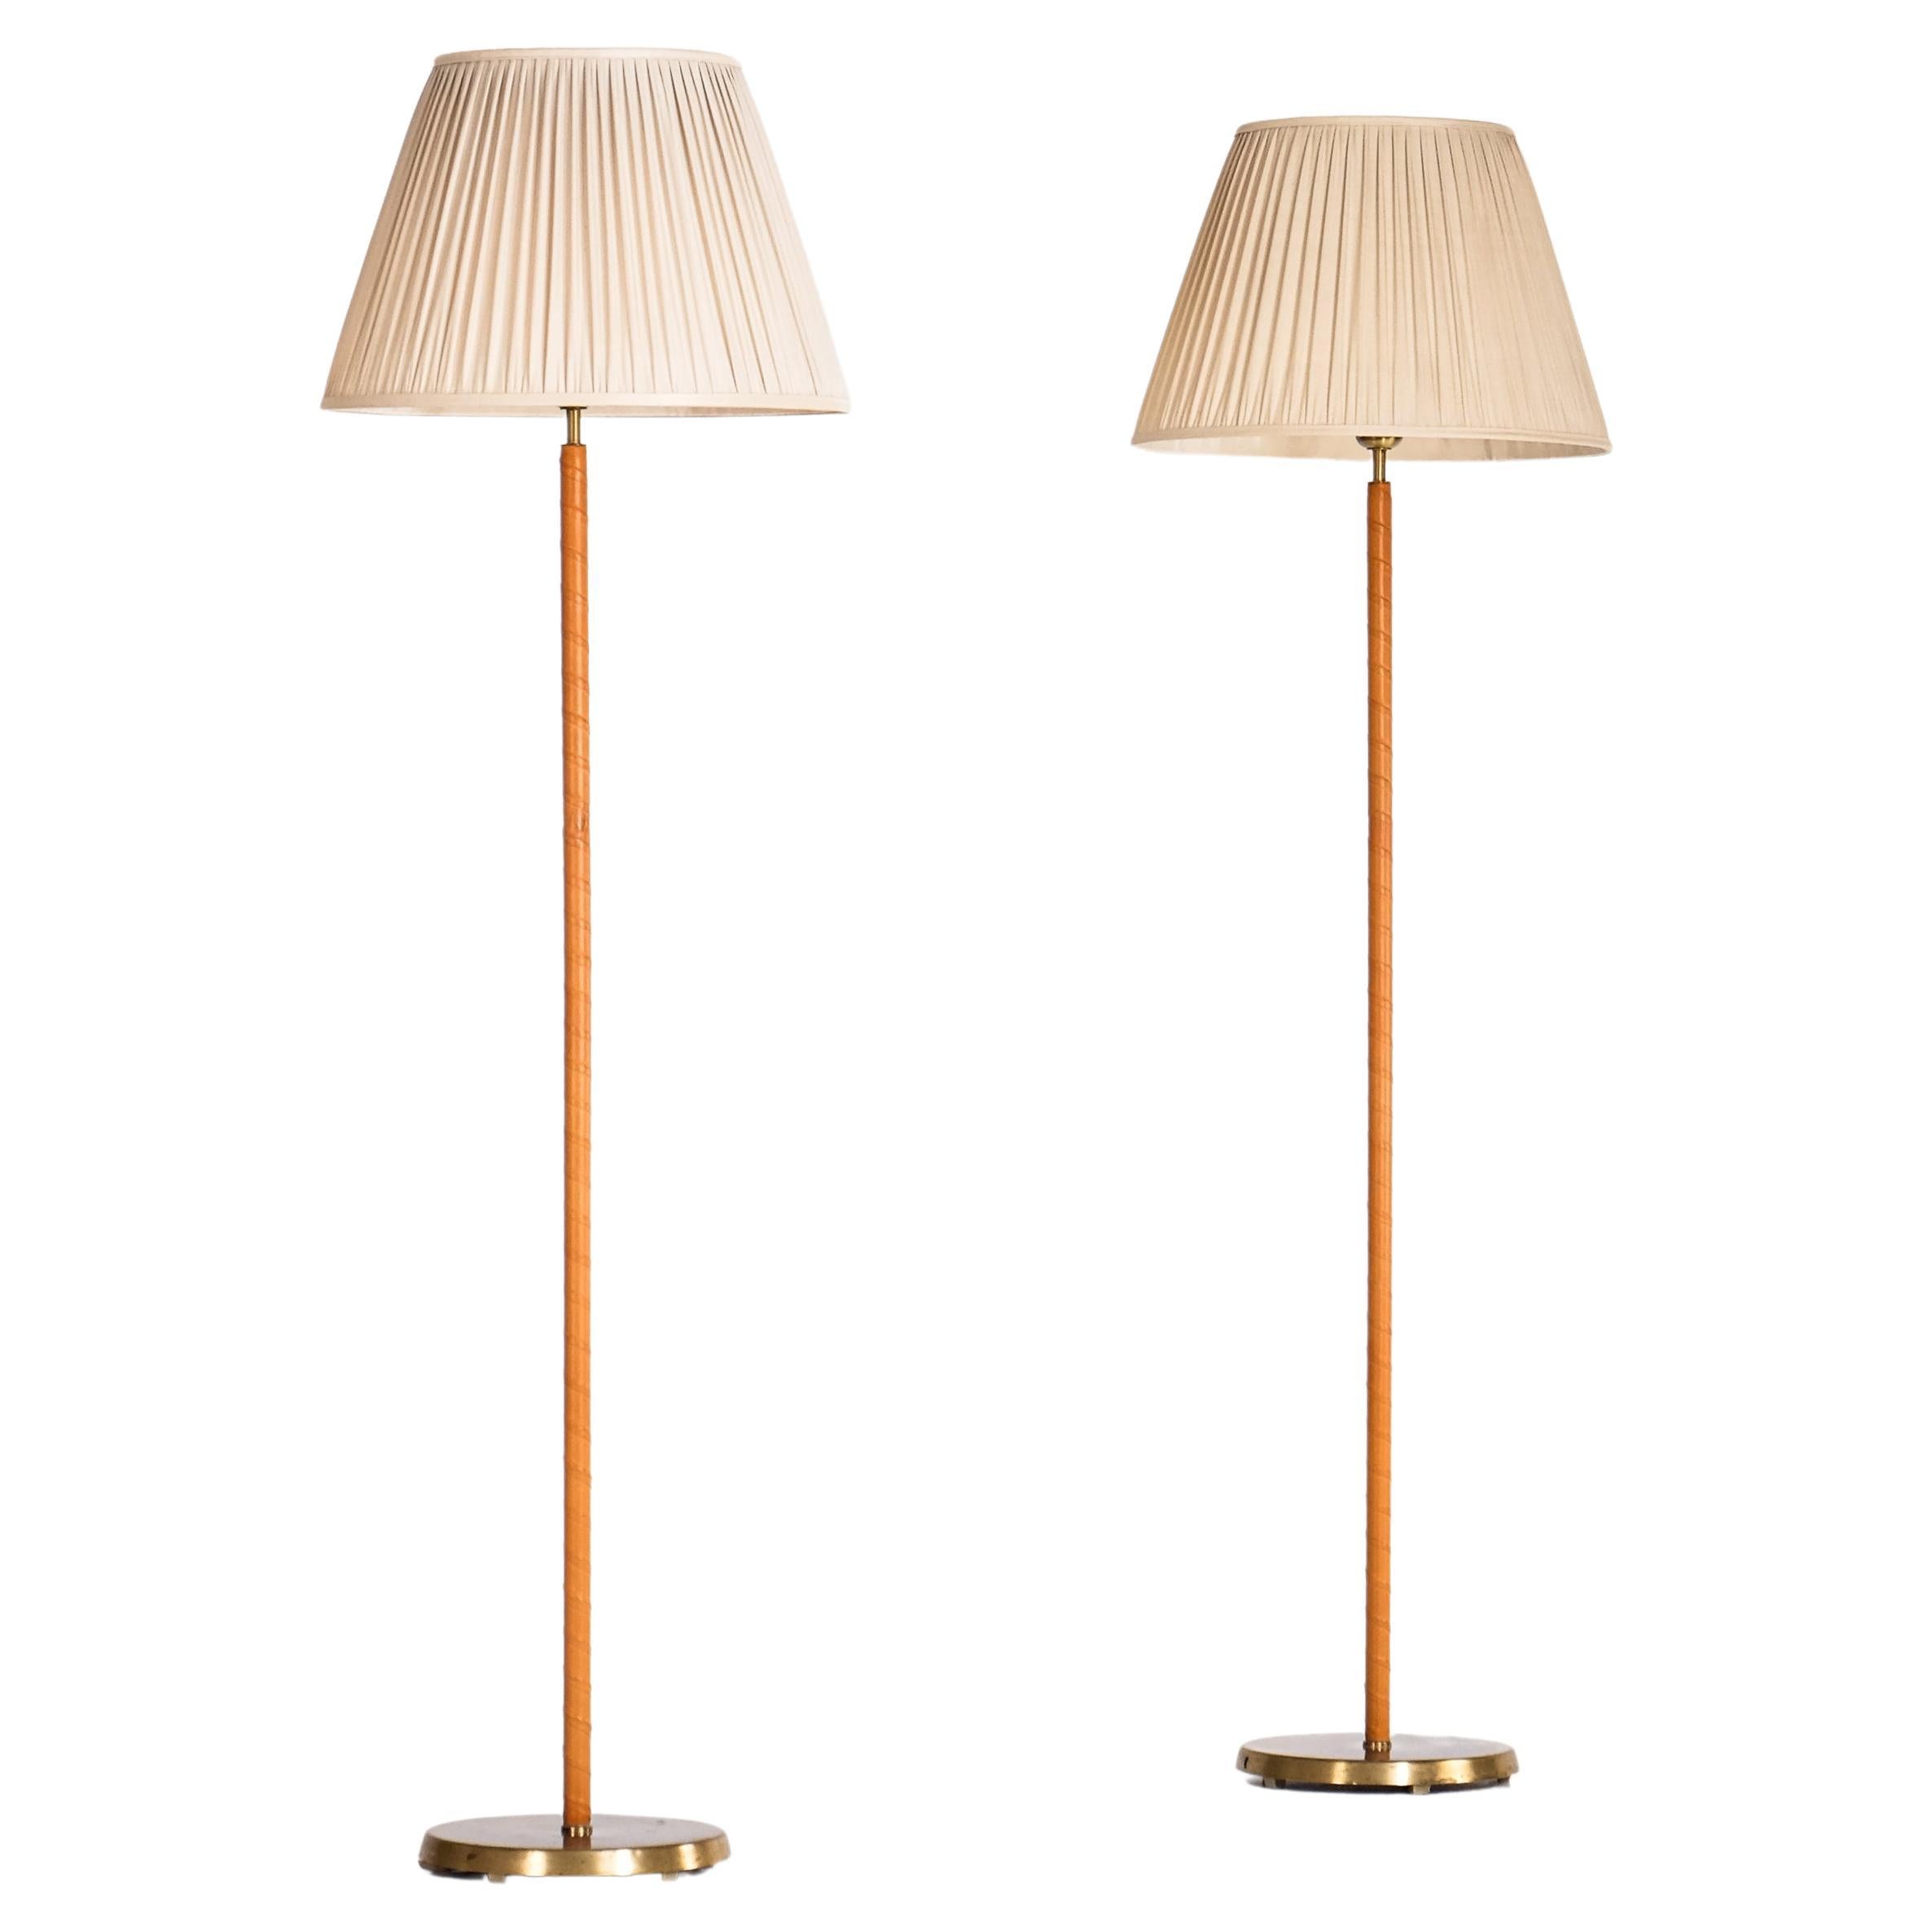 Brass & Leather Floor Lamps, Sweden, 1950s For Sale